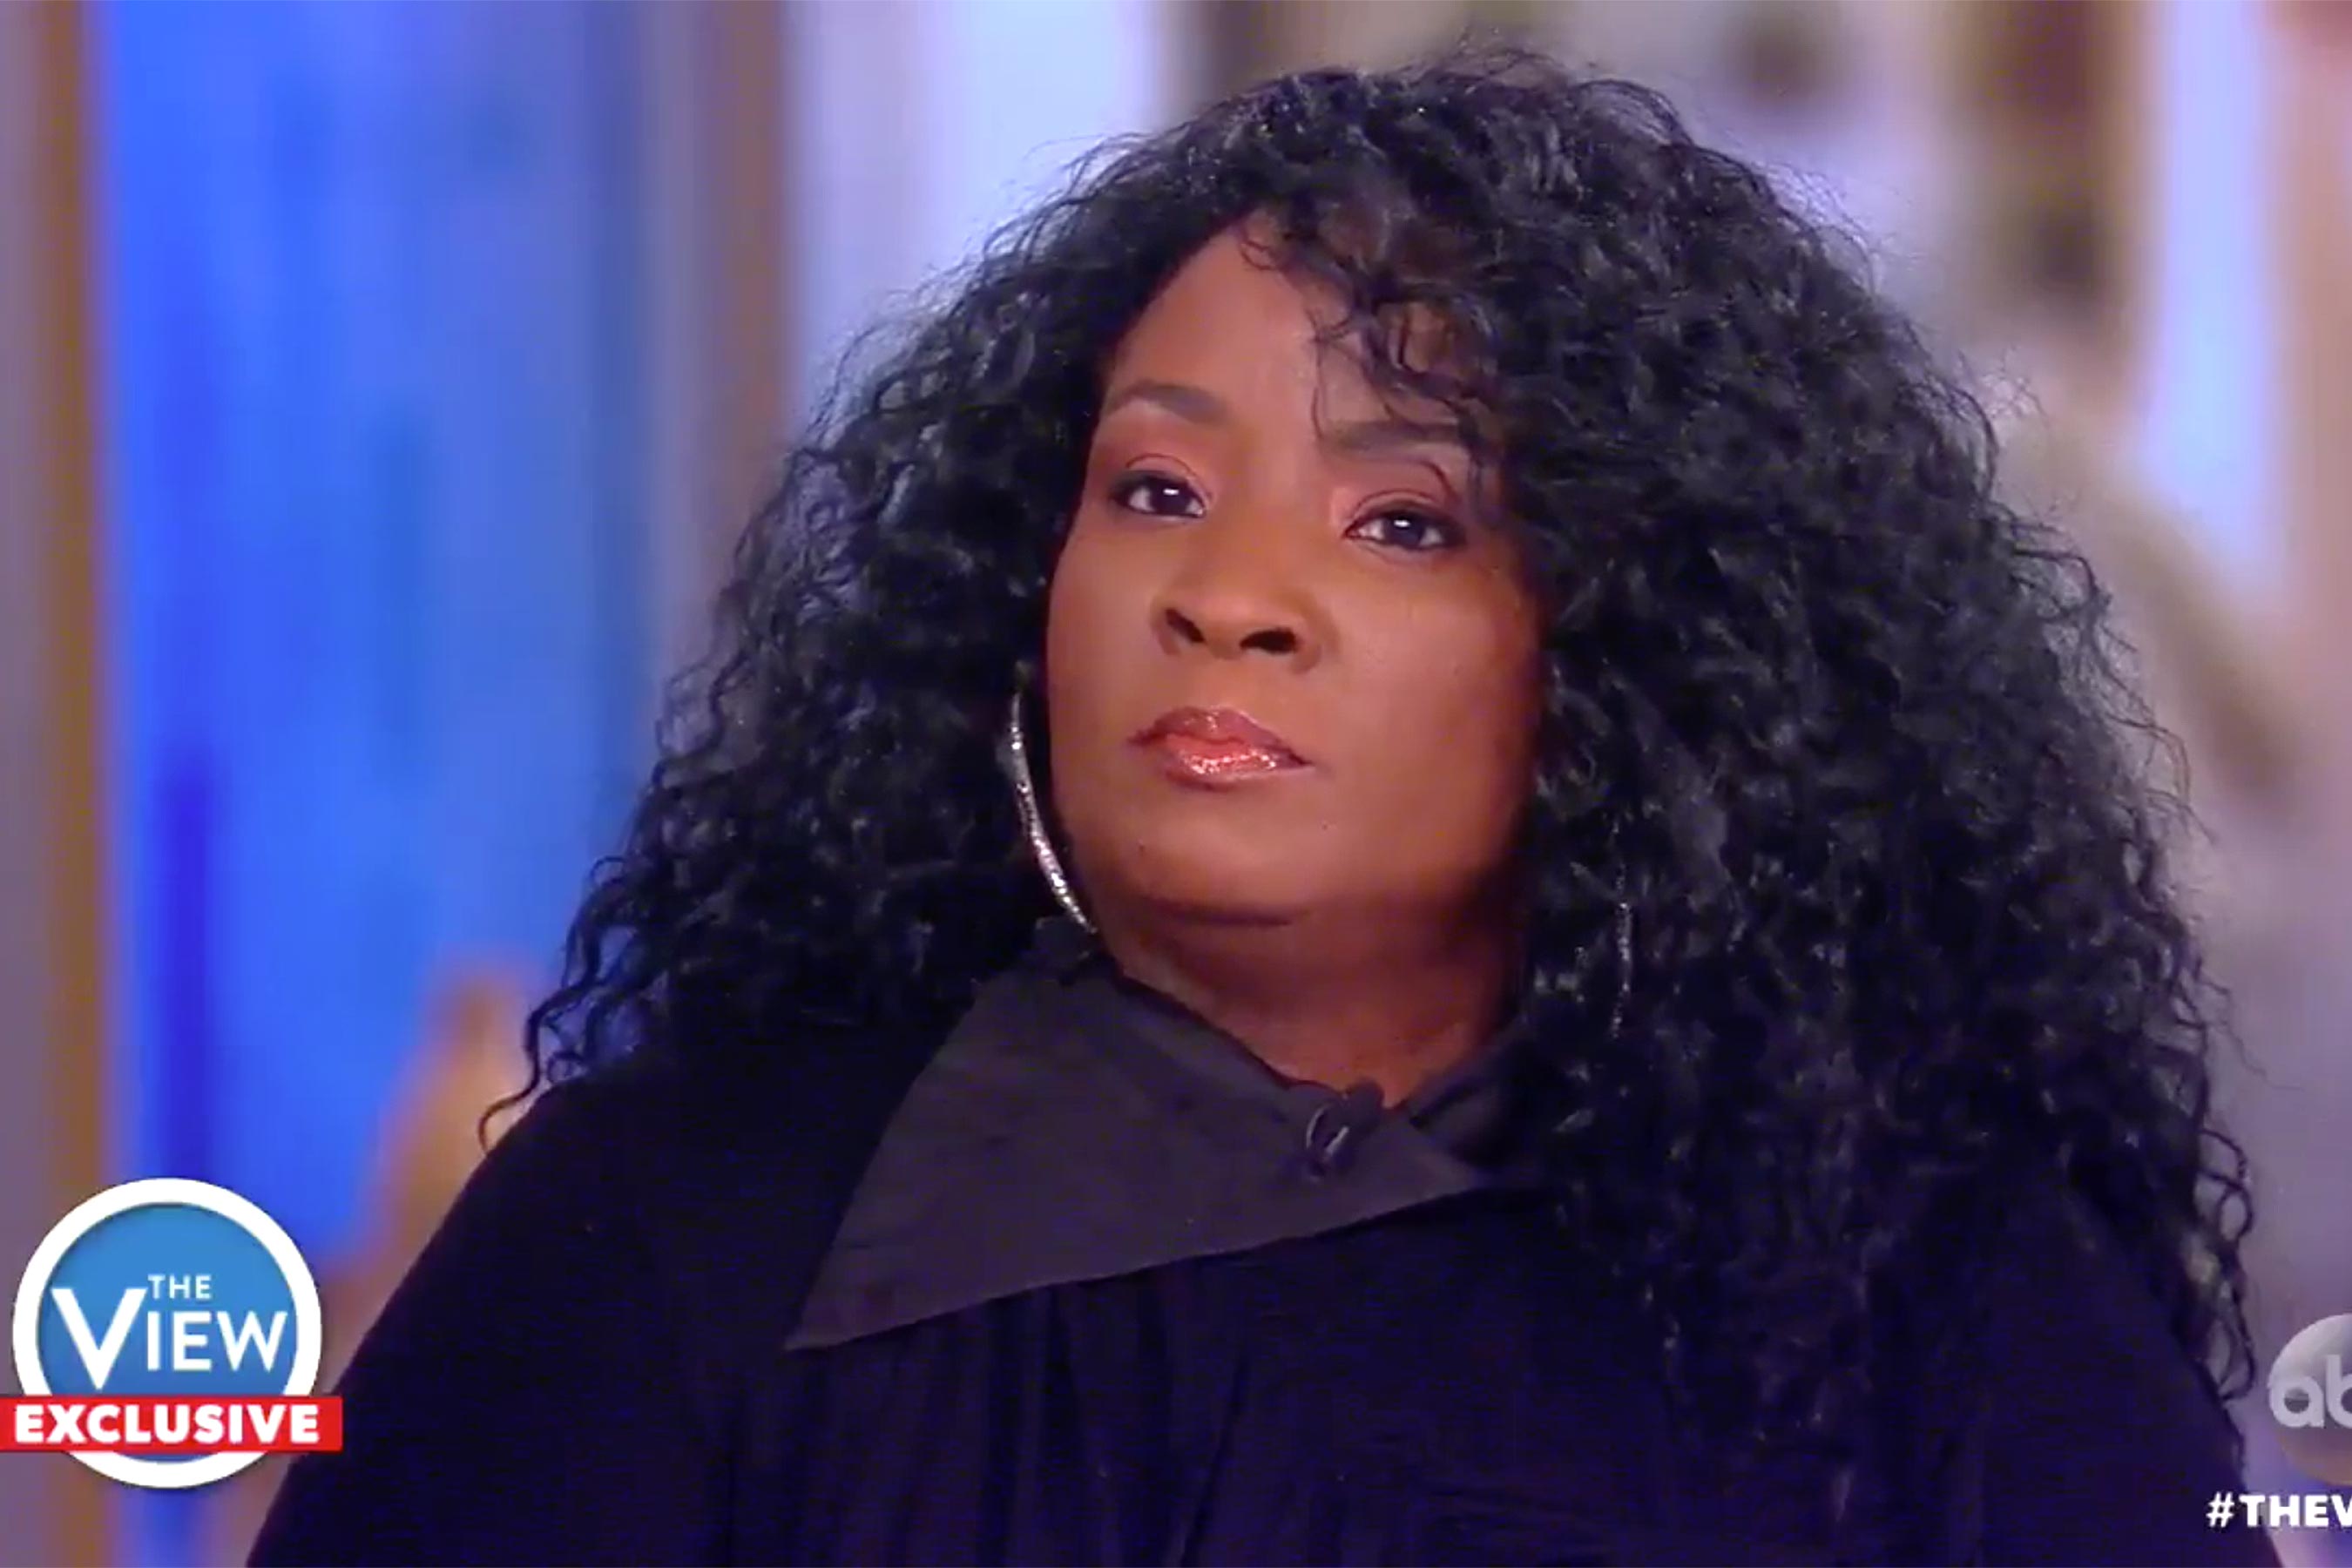 Bill O'Reilly Accuser Opens Up On 'The View' About Sexual, Racial Harassment
